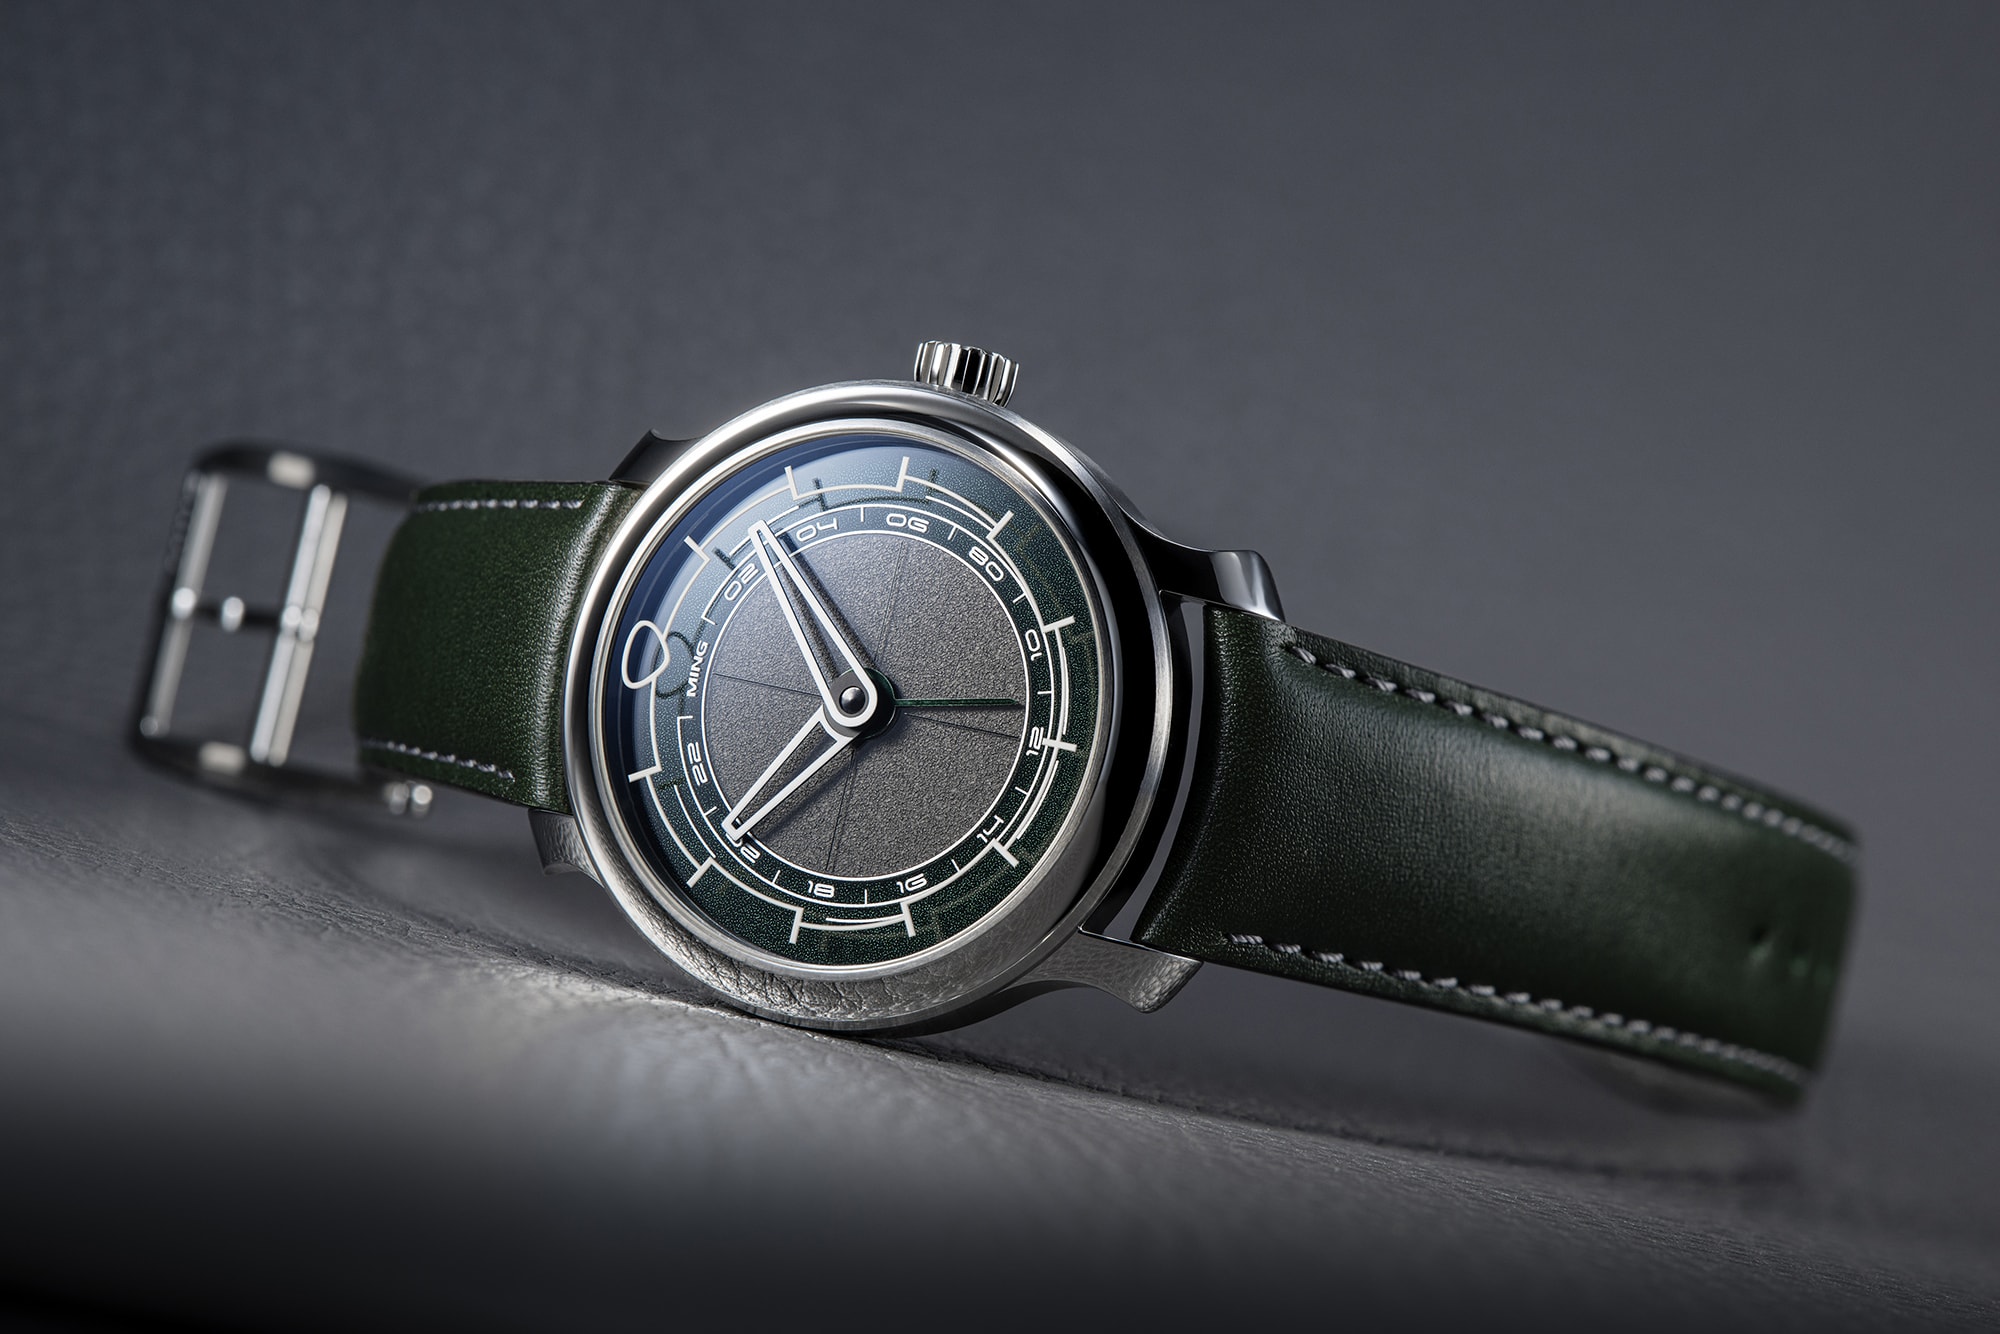 Ming Returns To The GMT In New 22.01 - Worn & Wound